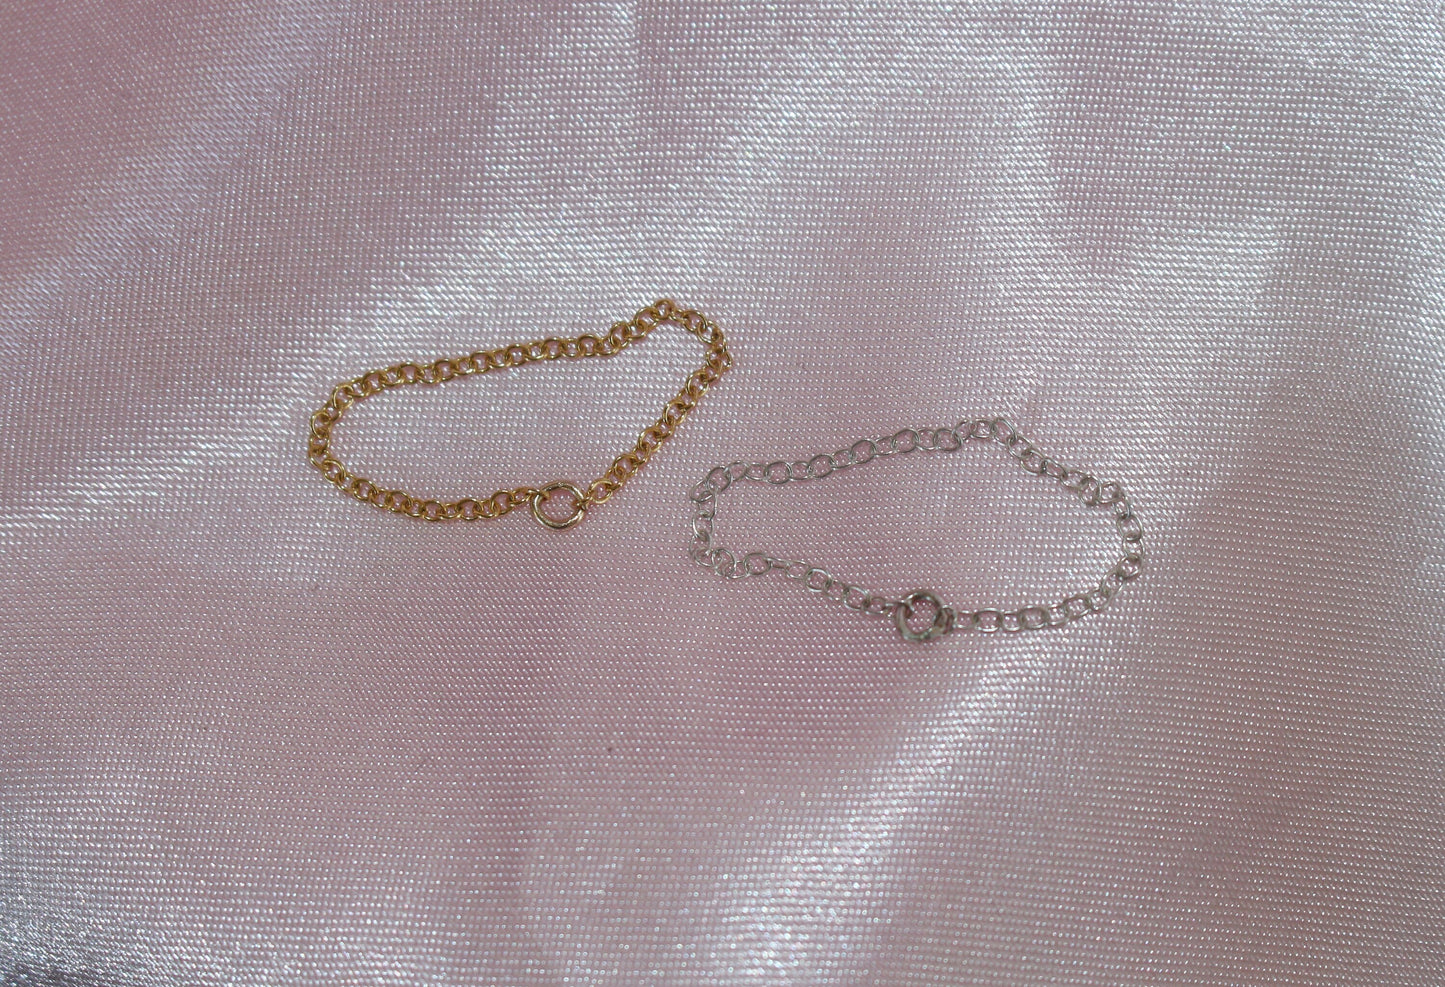 Delicate Chain Ring Available in Sterling Silver and 14k Gold Fill, Reversible Ring, Stackable Ring